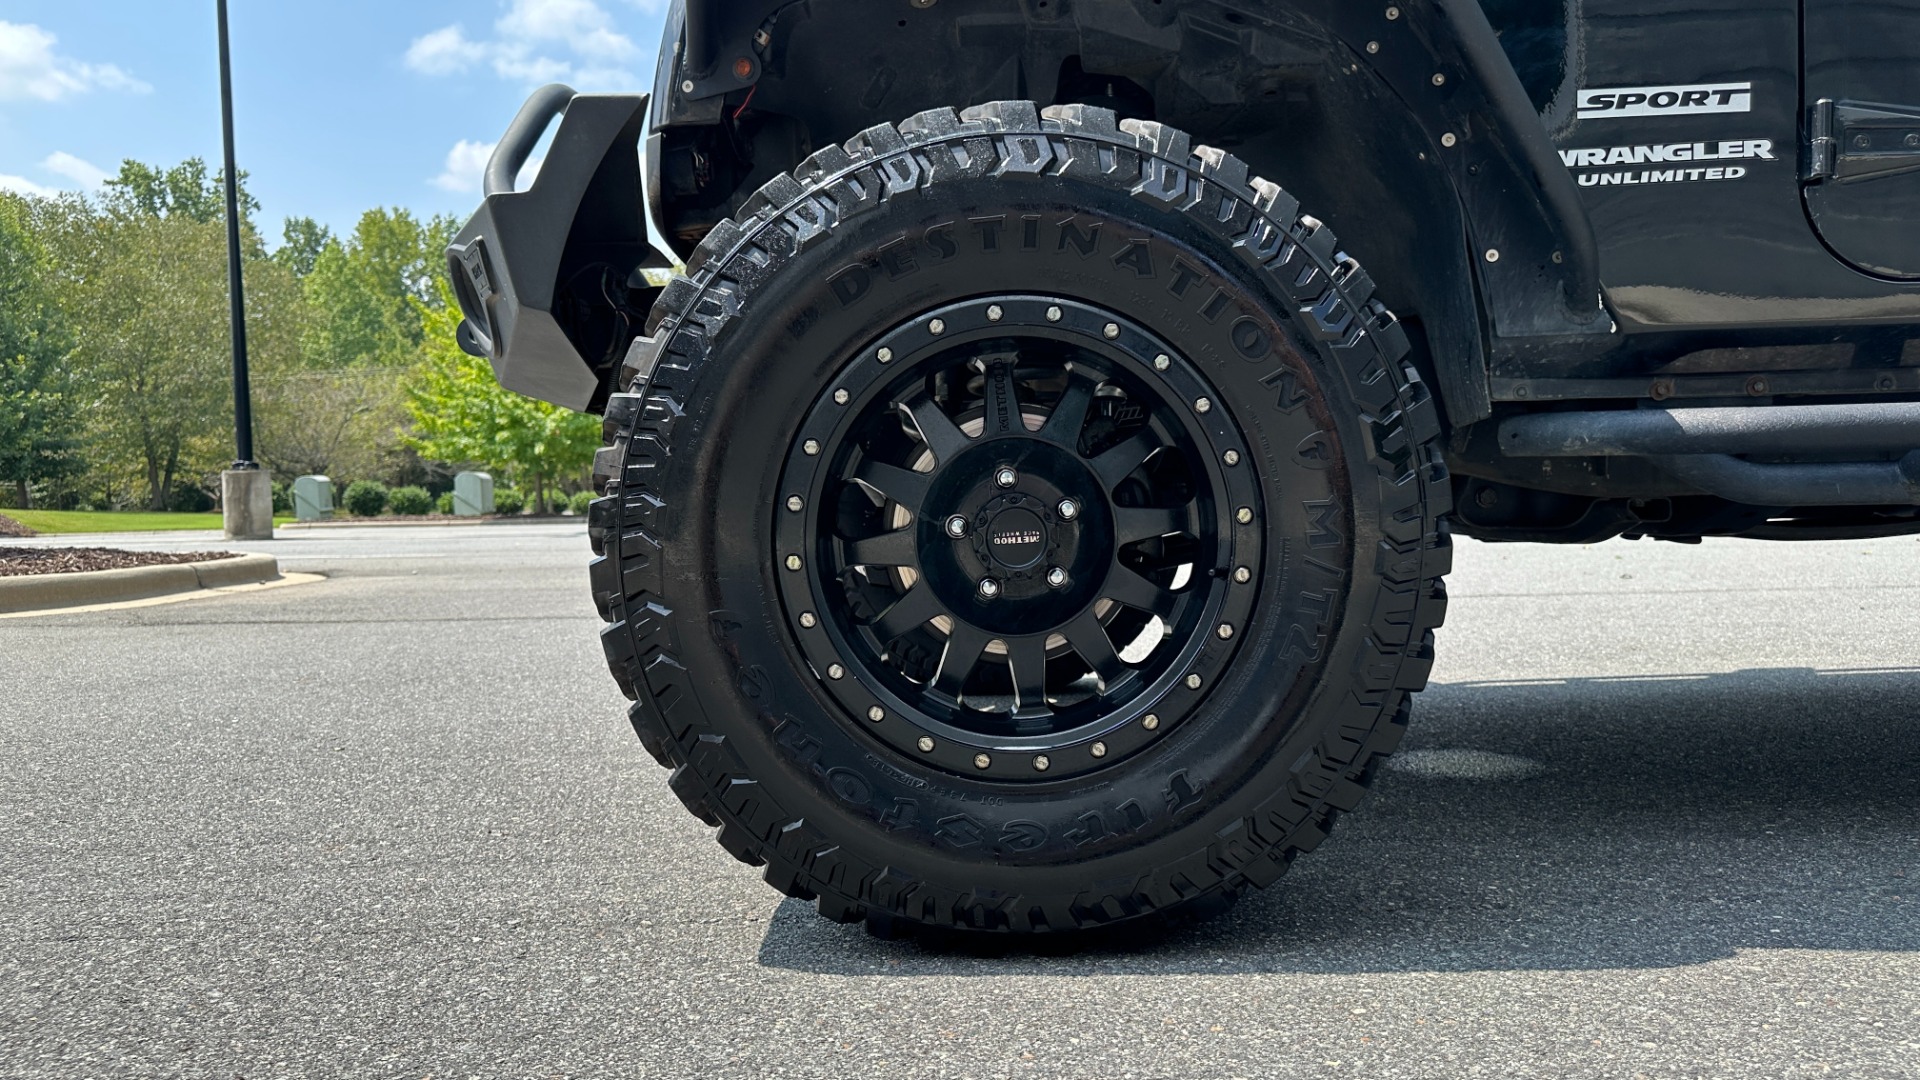 Used 2013 Jeep Wrangler Unlimited Sport / FOX SHOCKS / SOUND SYSTEM / TOUCHSCREEN / SUBWOOFER / TERRAFLEX SUS for sale $24,999 at Formula Imports in Charlotte NC 28227 70